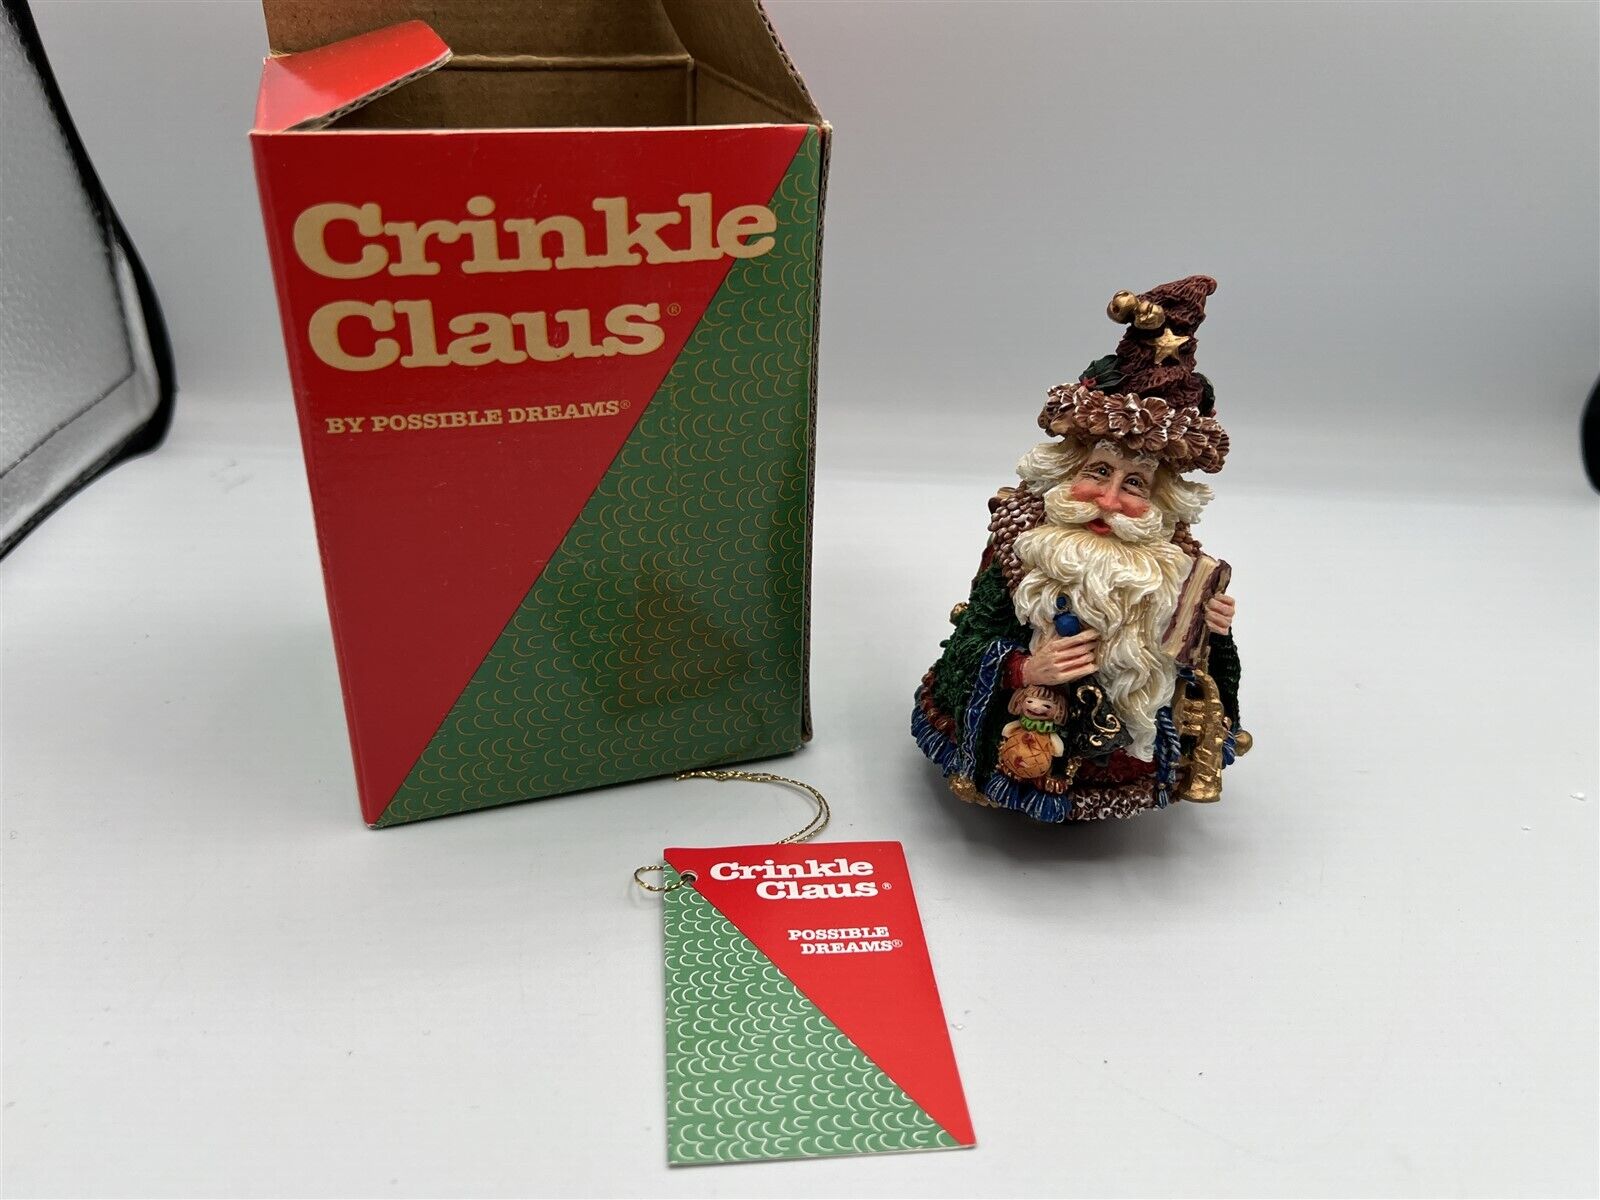 CRINKLE CLAUS SANTA WITH BOOK 659010 POSSIBLE DREAMS